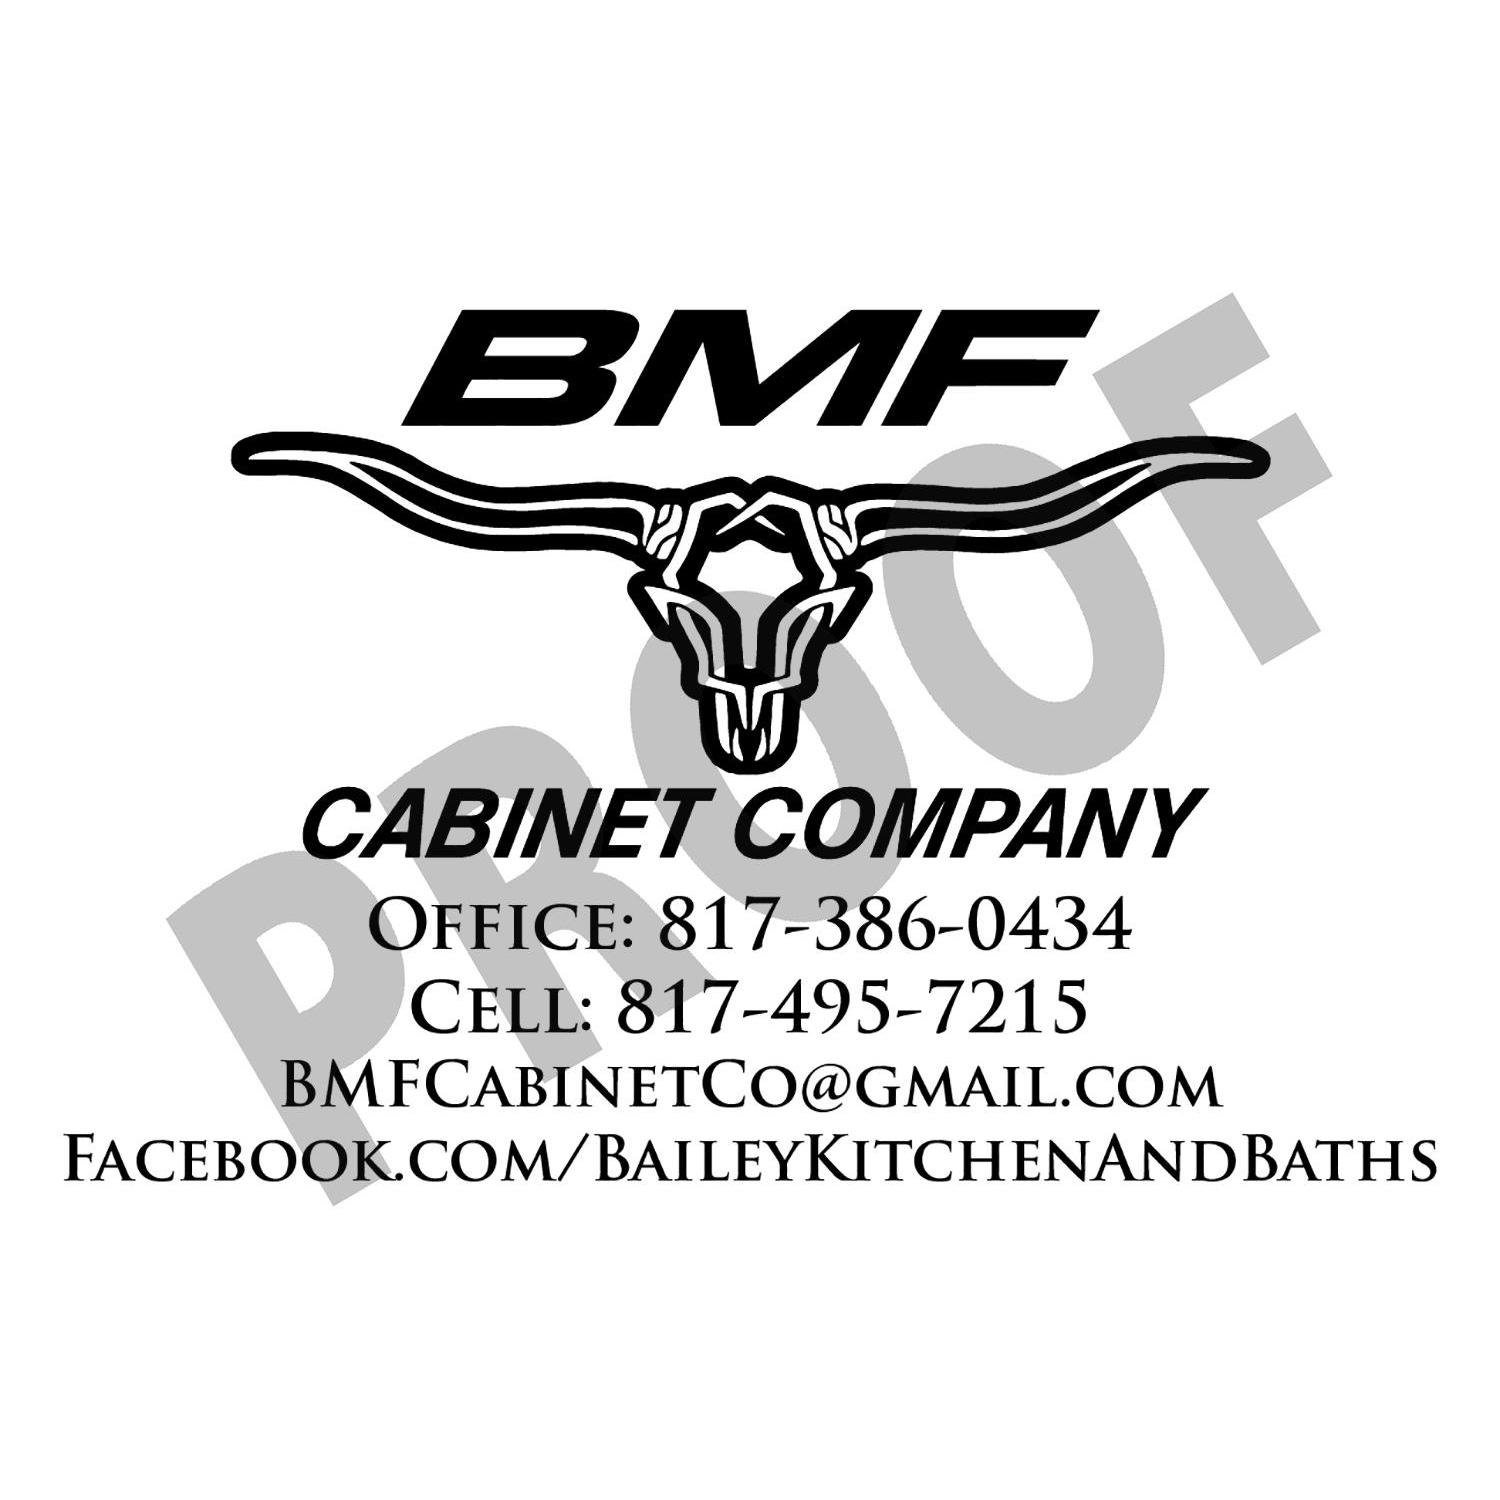 BMF Cabinet Company - Weatherford, TX - (817)495-7215 | ShowMeLocal.com